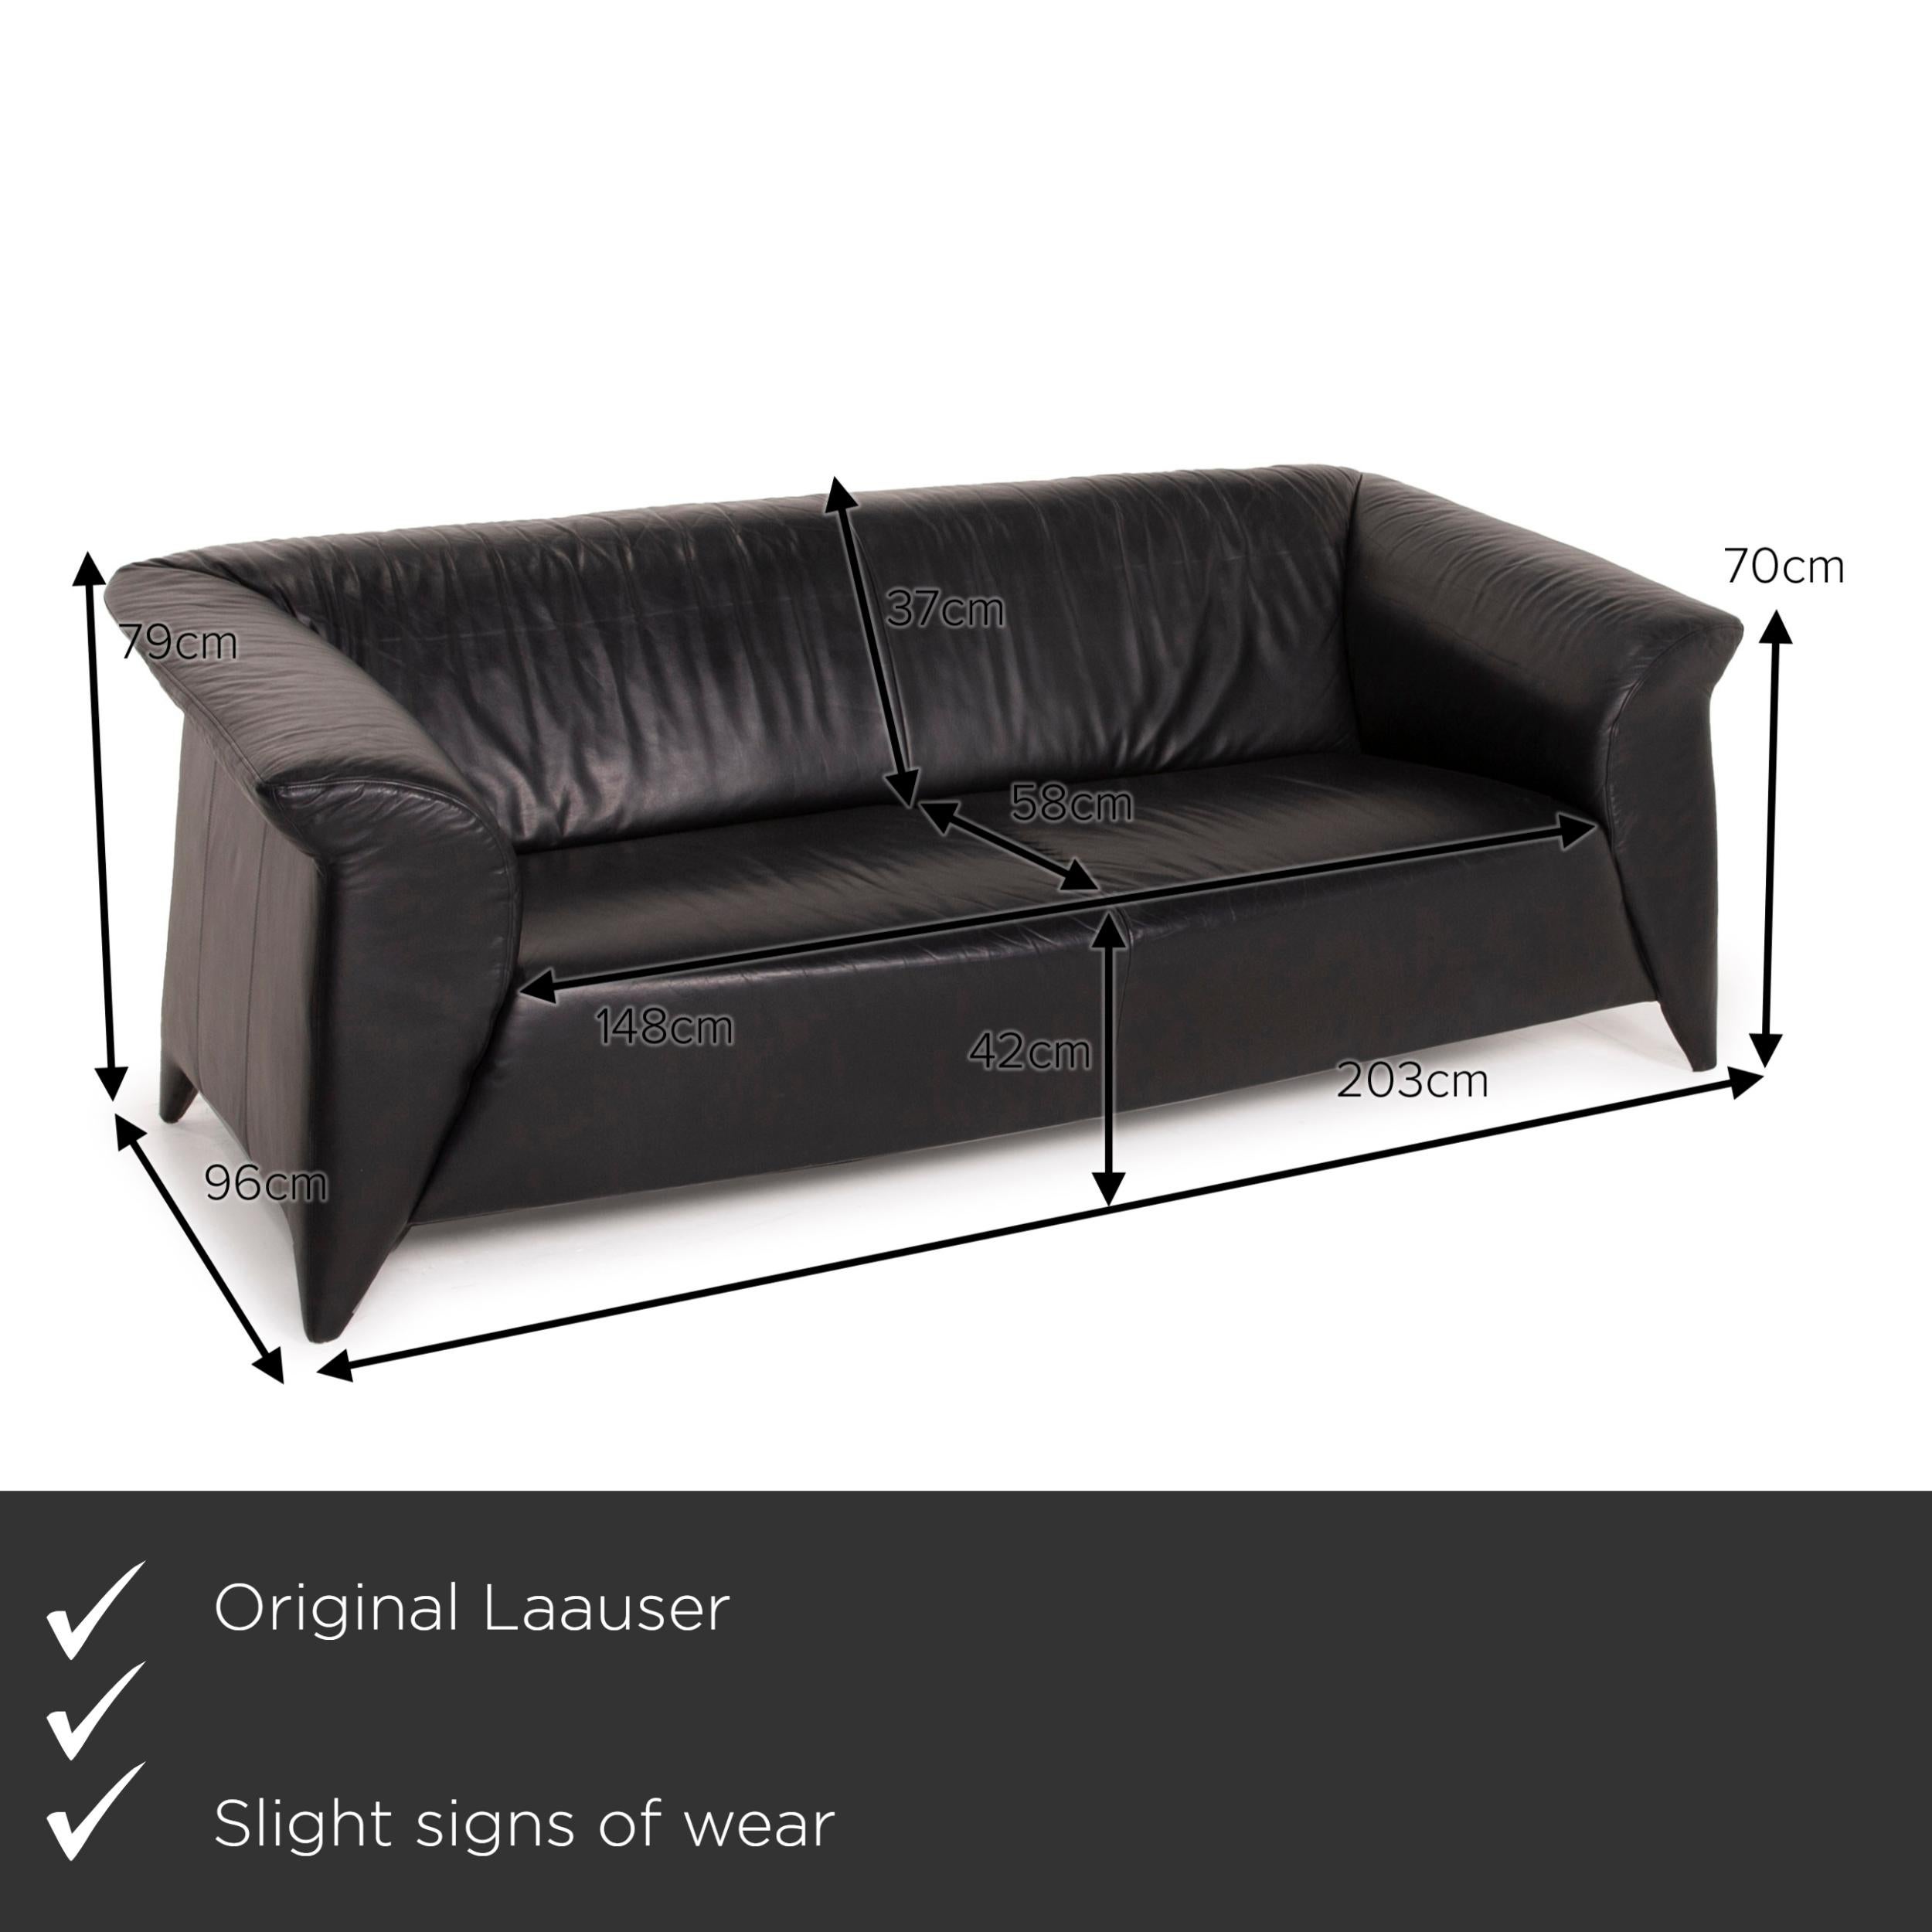 We present to you a Laauser leather sofa black two-seater.


 Product measurements in centimeters:
 

Depth: 96
Width: 203
Height: 79
Seat height: 42
Rest height: 70
Seat depth: 58
Seat width: 148
Back height: 37.
 